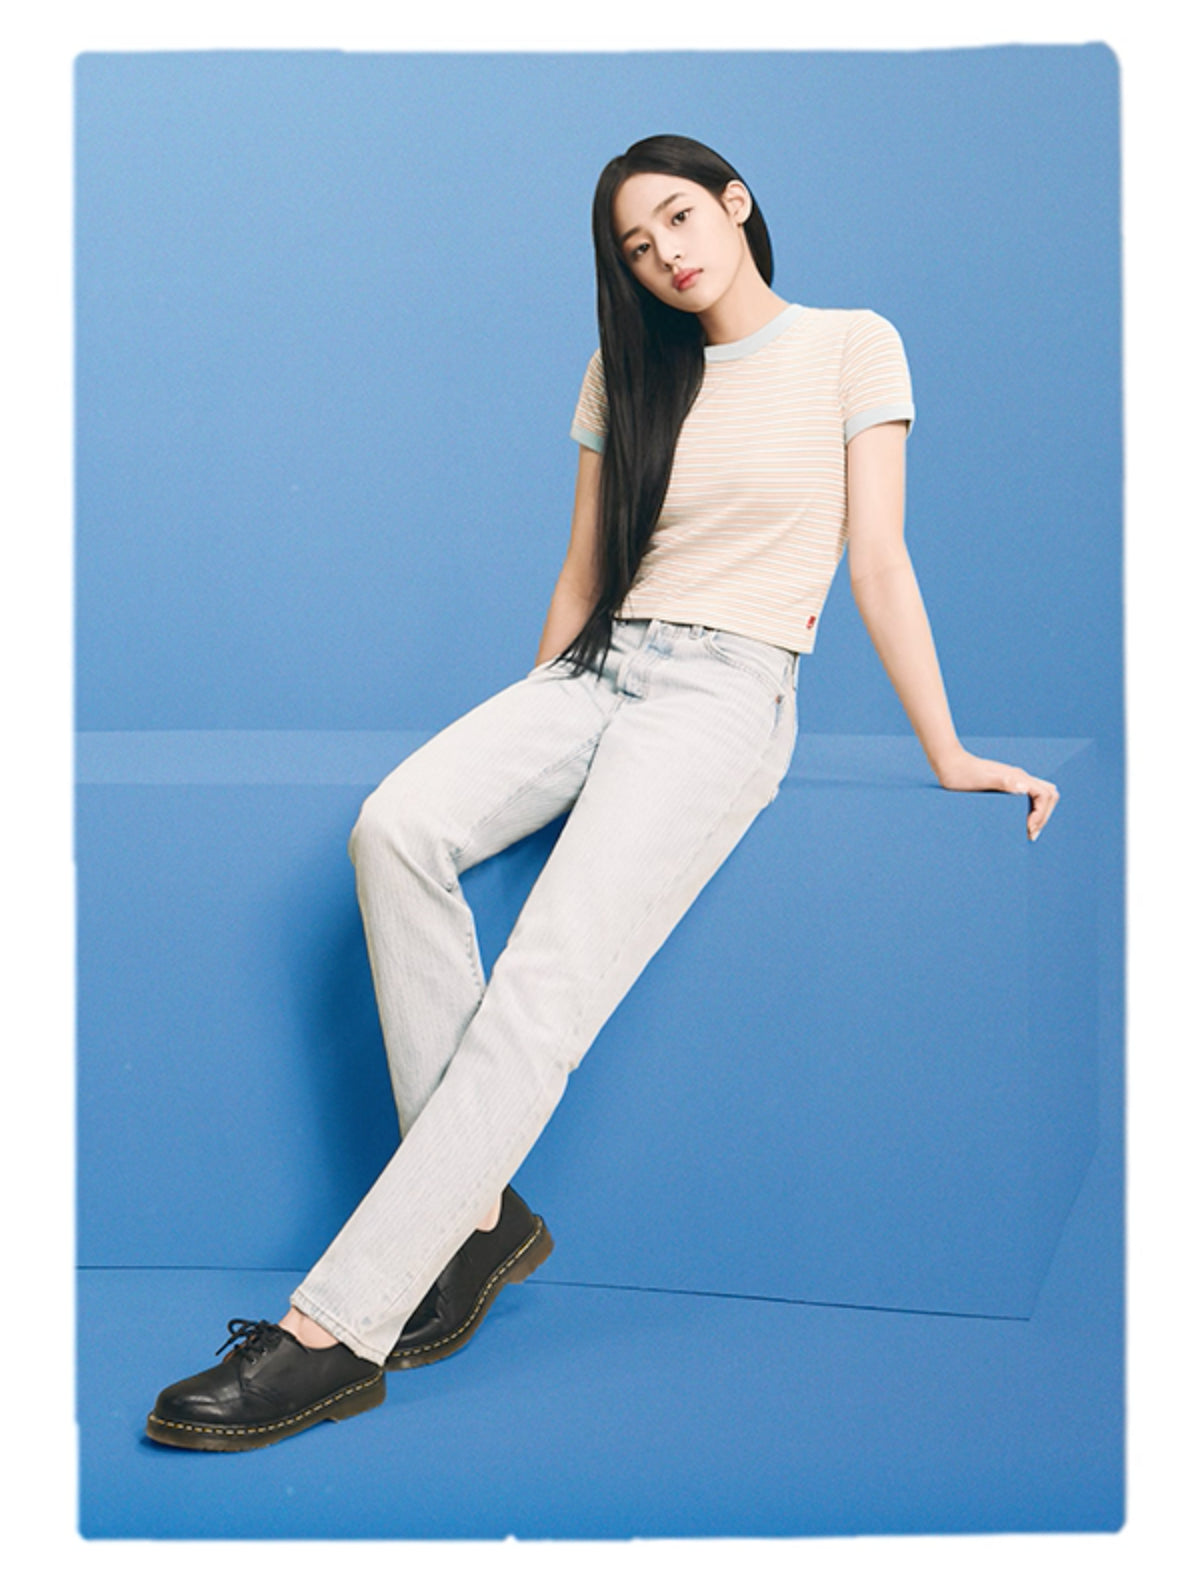 NWJNS Minji styled in Levi's 501 jeans - Levi's Hong Kong 